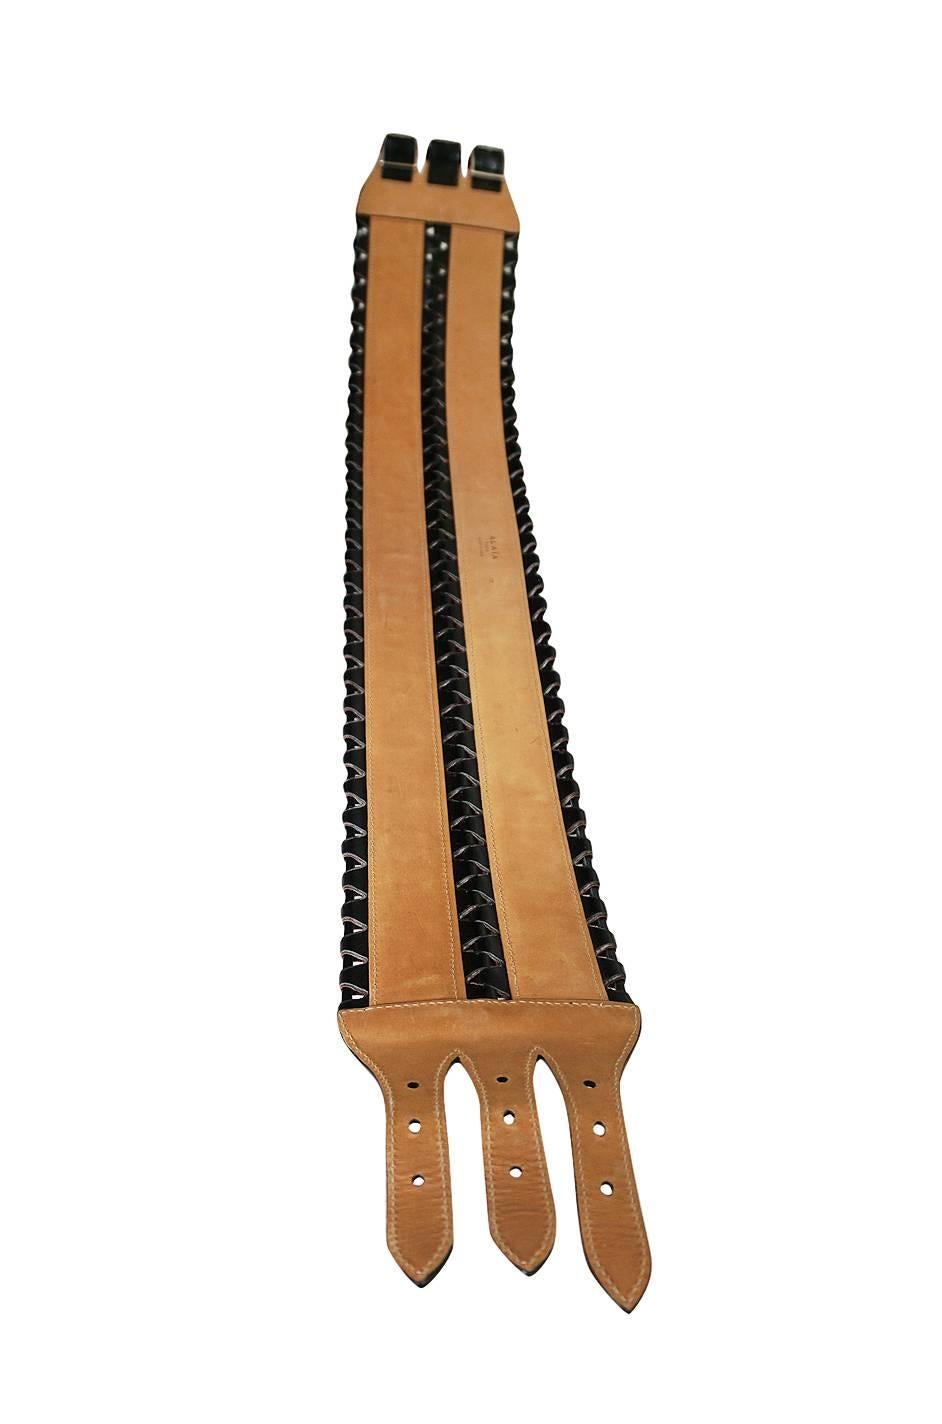 The wide Alaia corset belt in butter soft black leather is a closet staple for any woman who loves fashion. Nothing gives you that hour glass figure like buckling on over whatever you are wearing. Its an instant statement piece. This recent example